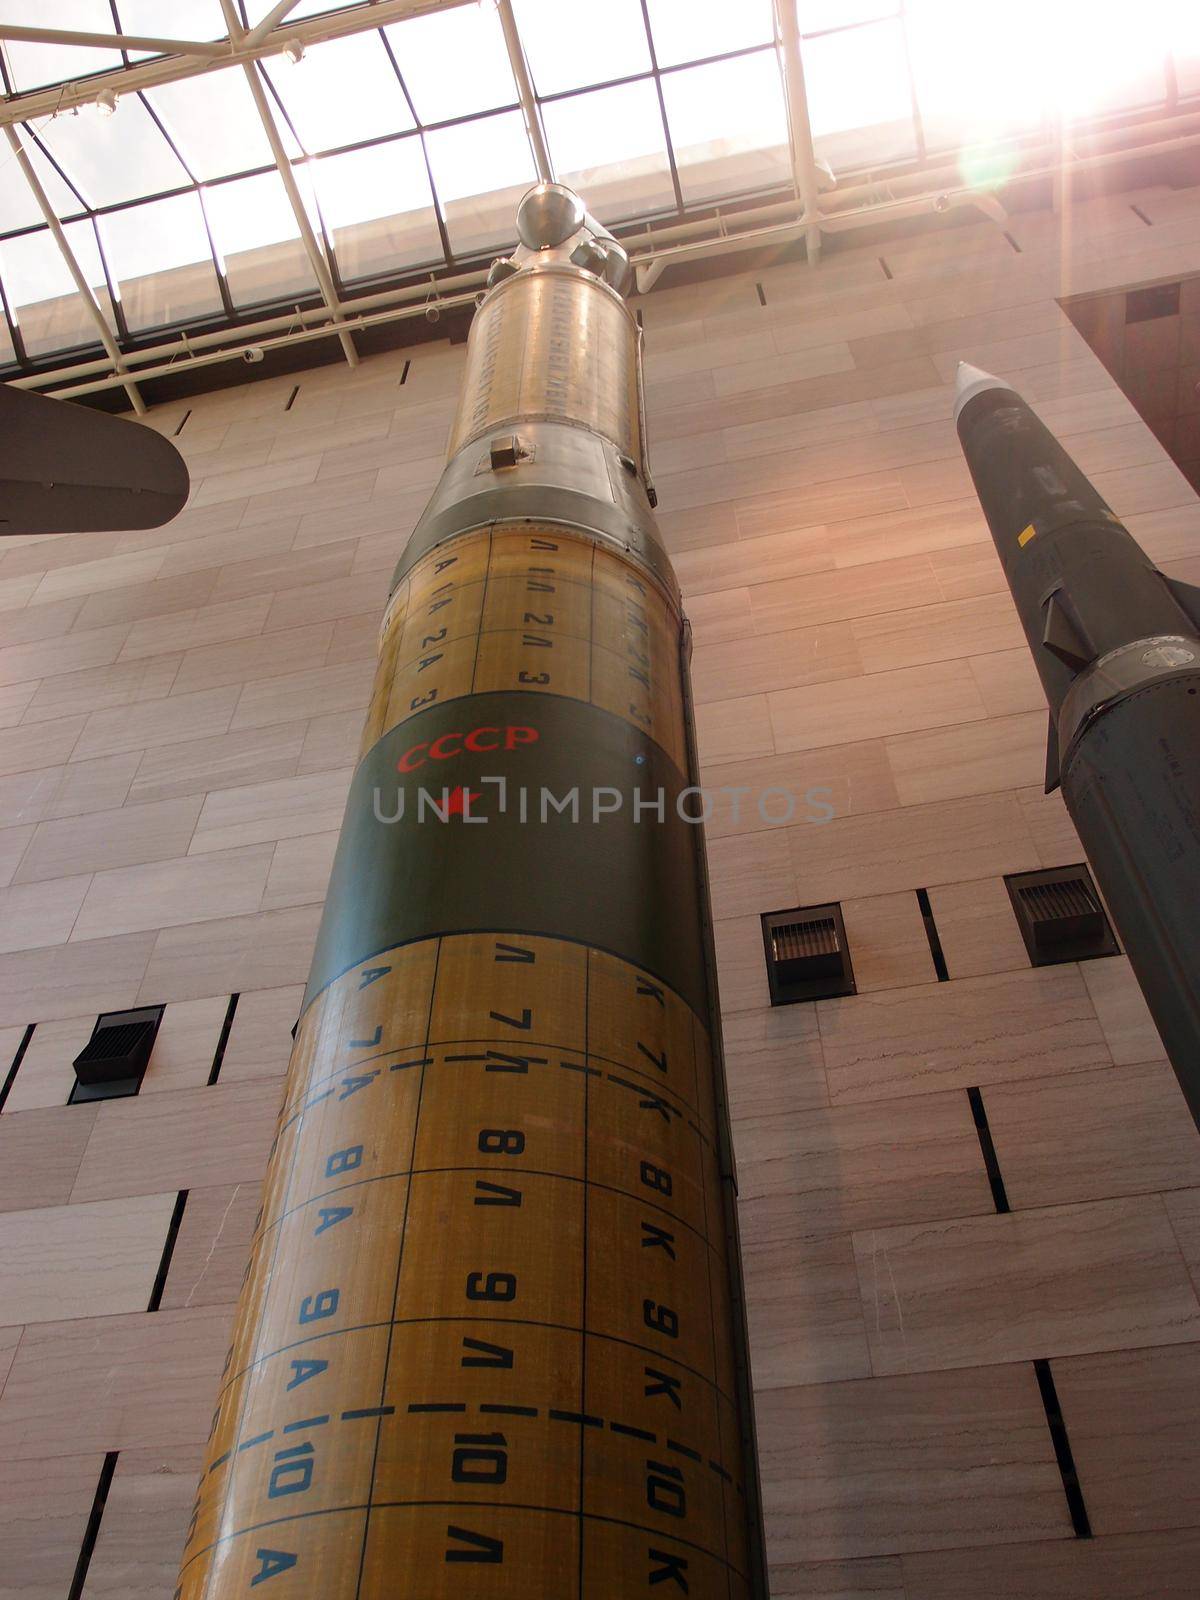 Washington, USA, - June 11,2014: The SS-20, known as the "Pioneer" in Russian, is a two-stage, solid propellant missile with three multiple targetable reentry warheads.

The missile is almost 16.5 meters tall. Painted on missile are the letters "CCCP" and a yellow five-point star.  The skylight in the National Air and Space museum is shining in sunlight in Washington which holds the largest collection of historic aircraft and spacecraft in the world.